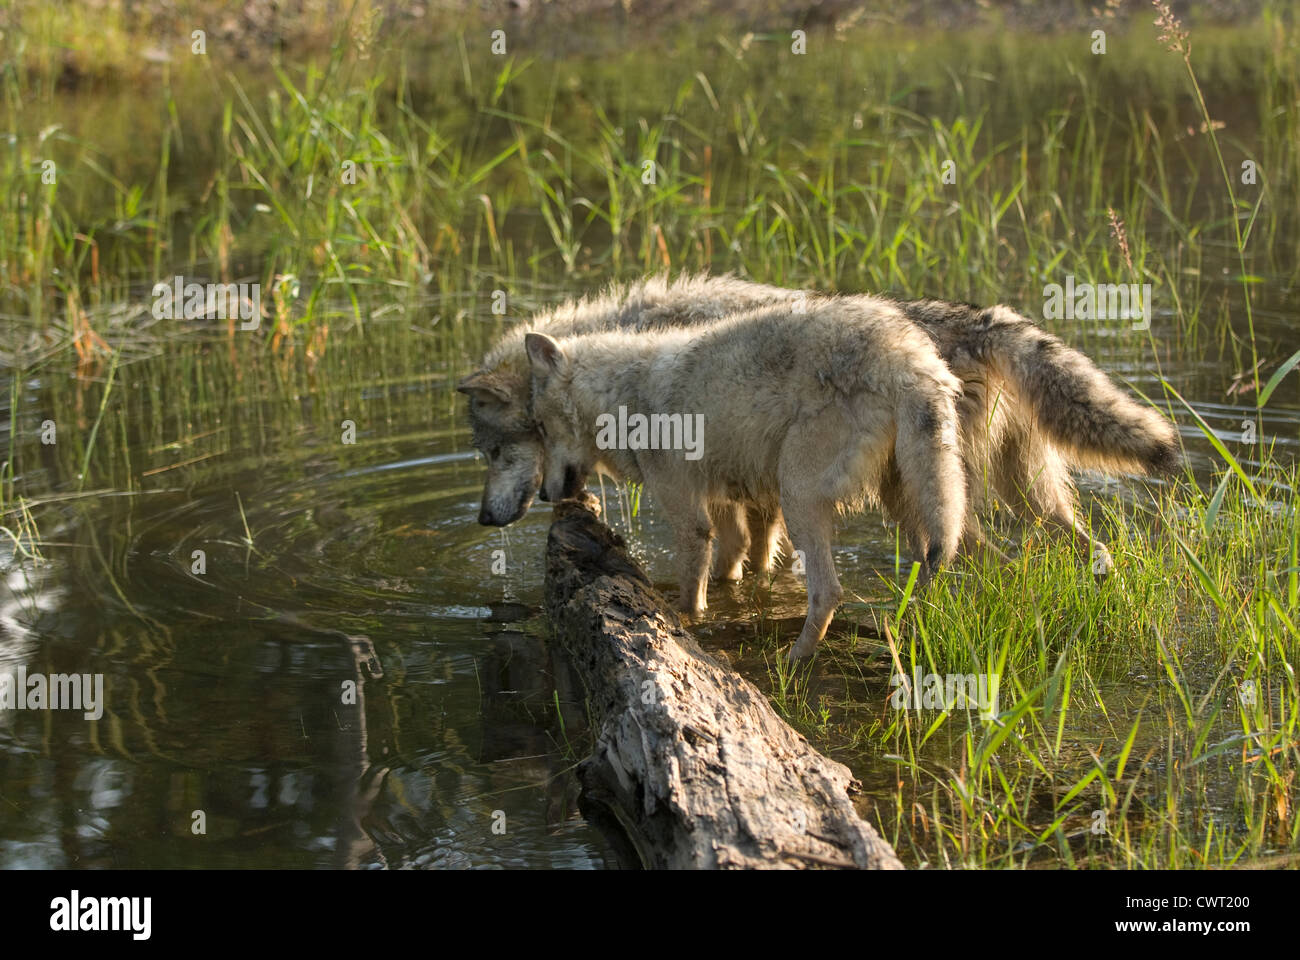 Two wolves playing in the water of a shallow pond Stock Photo